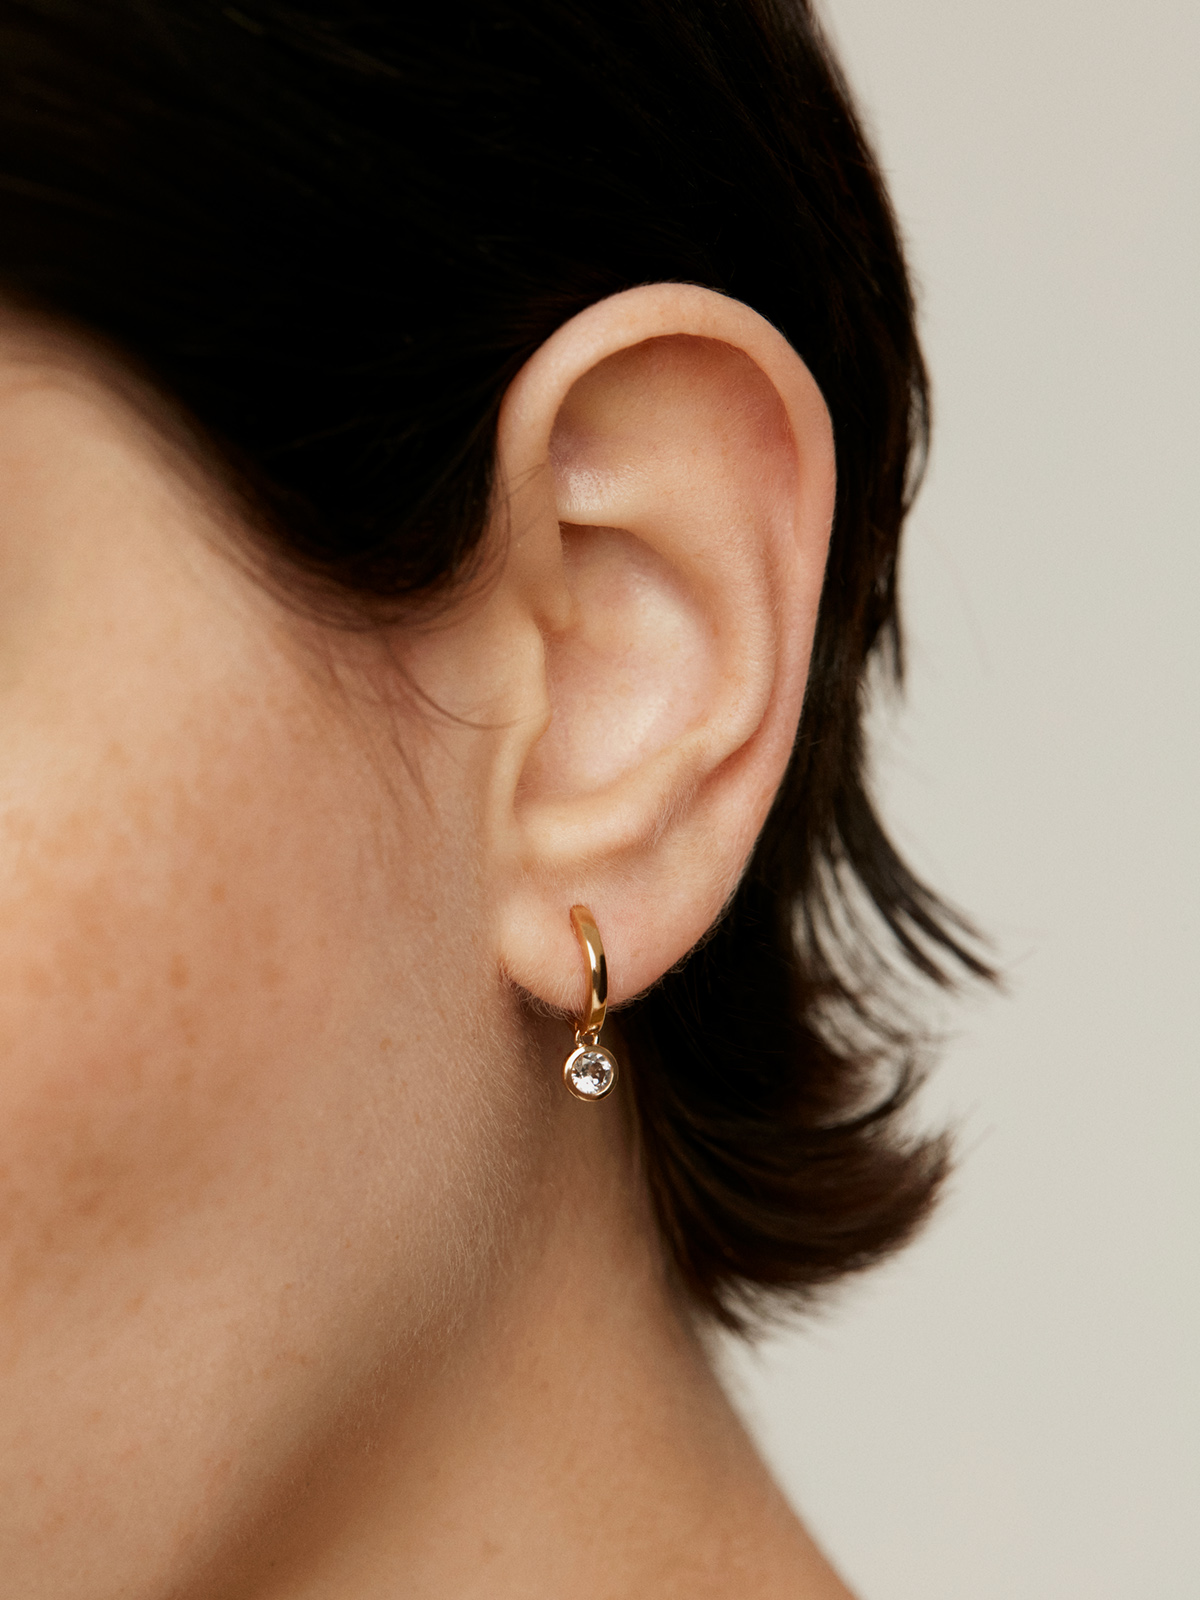 Small hoop earrings made from 925 silver, plated in 18K yellow gold with white topaz